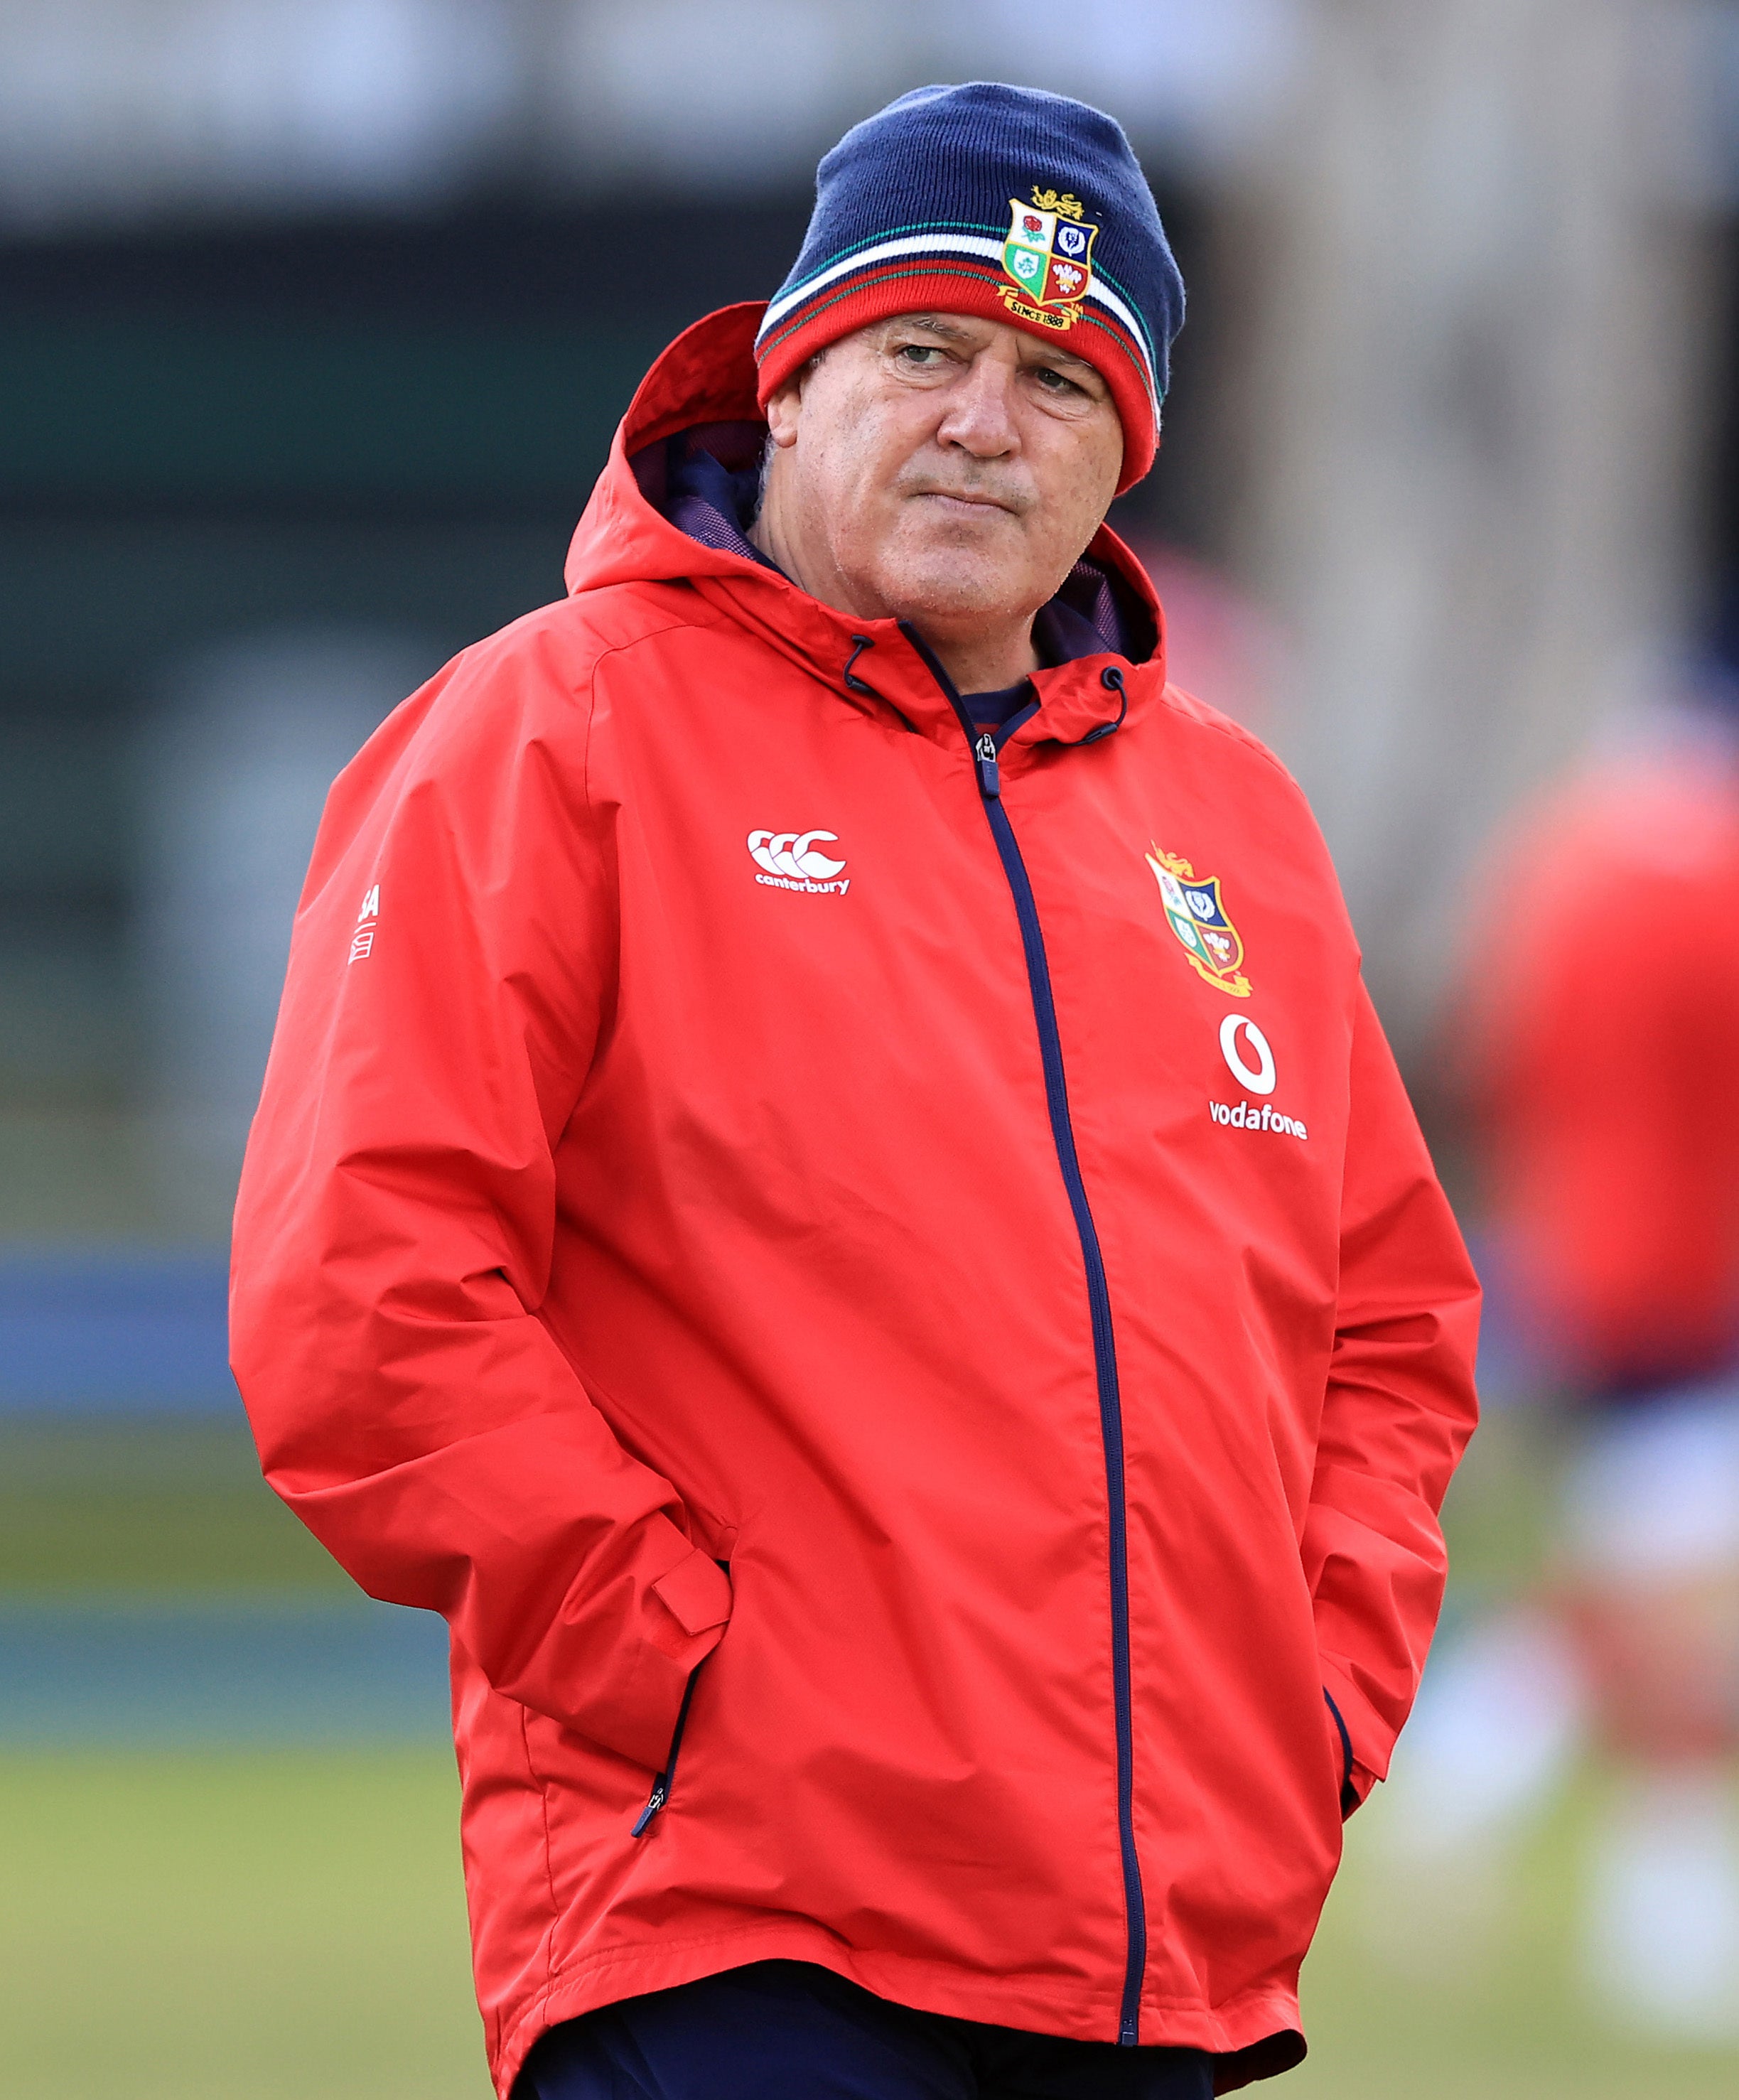 Warren Gatland has urged his Lions to clinch a series victory over South Africa with a Test to spare (David Rogers/PA)